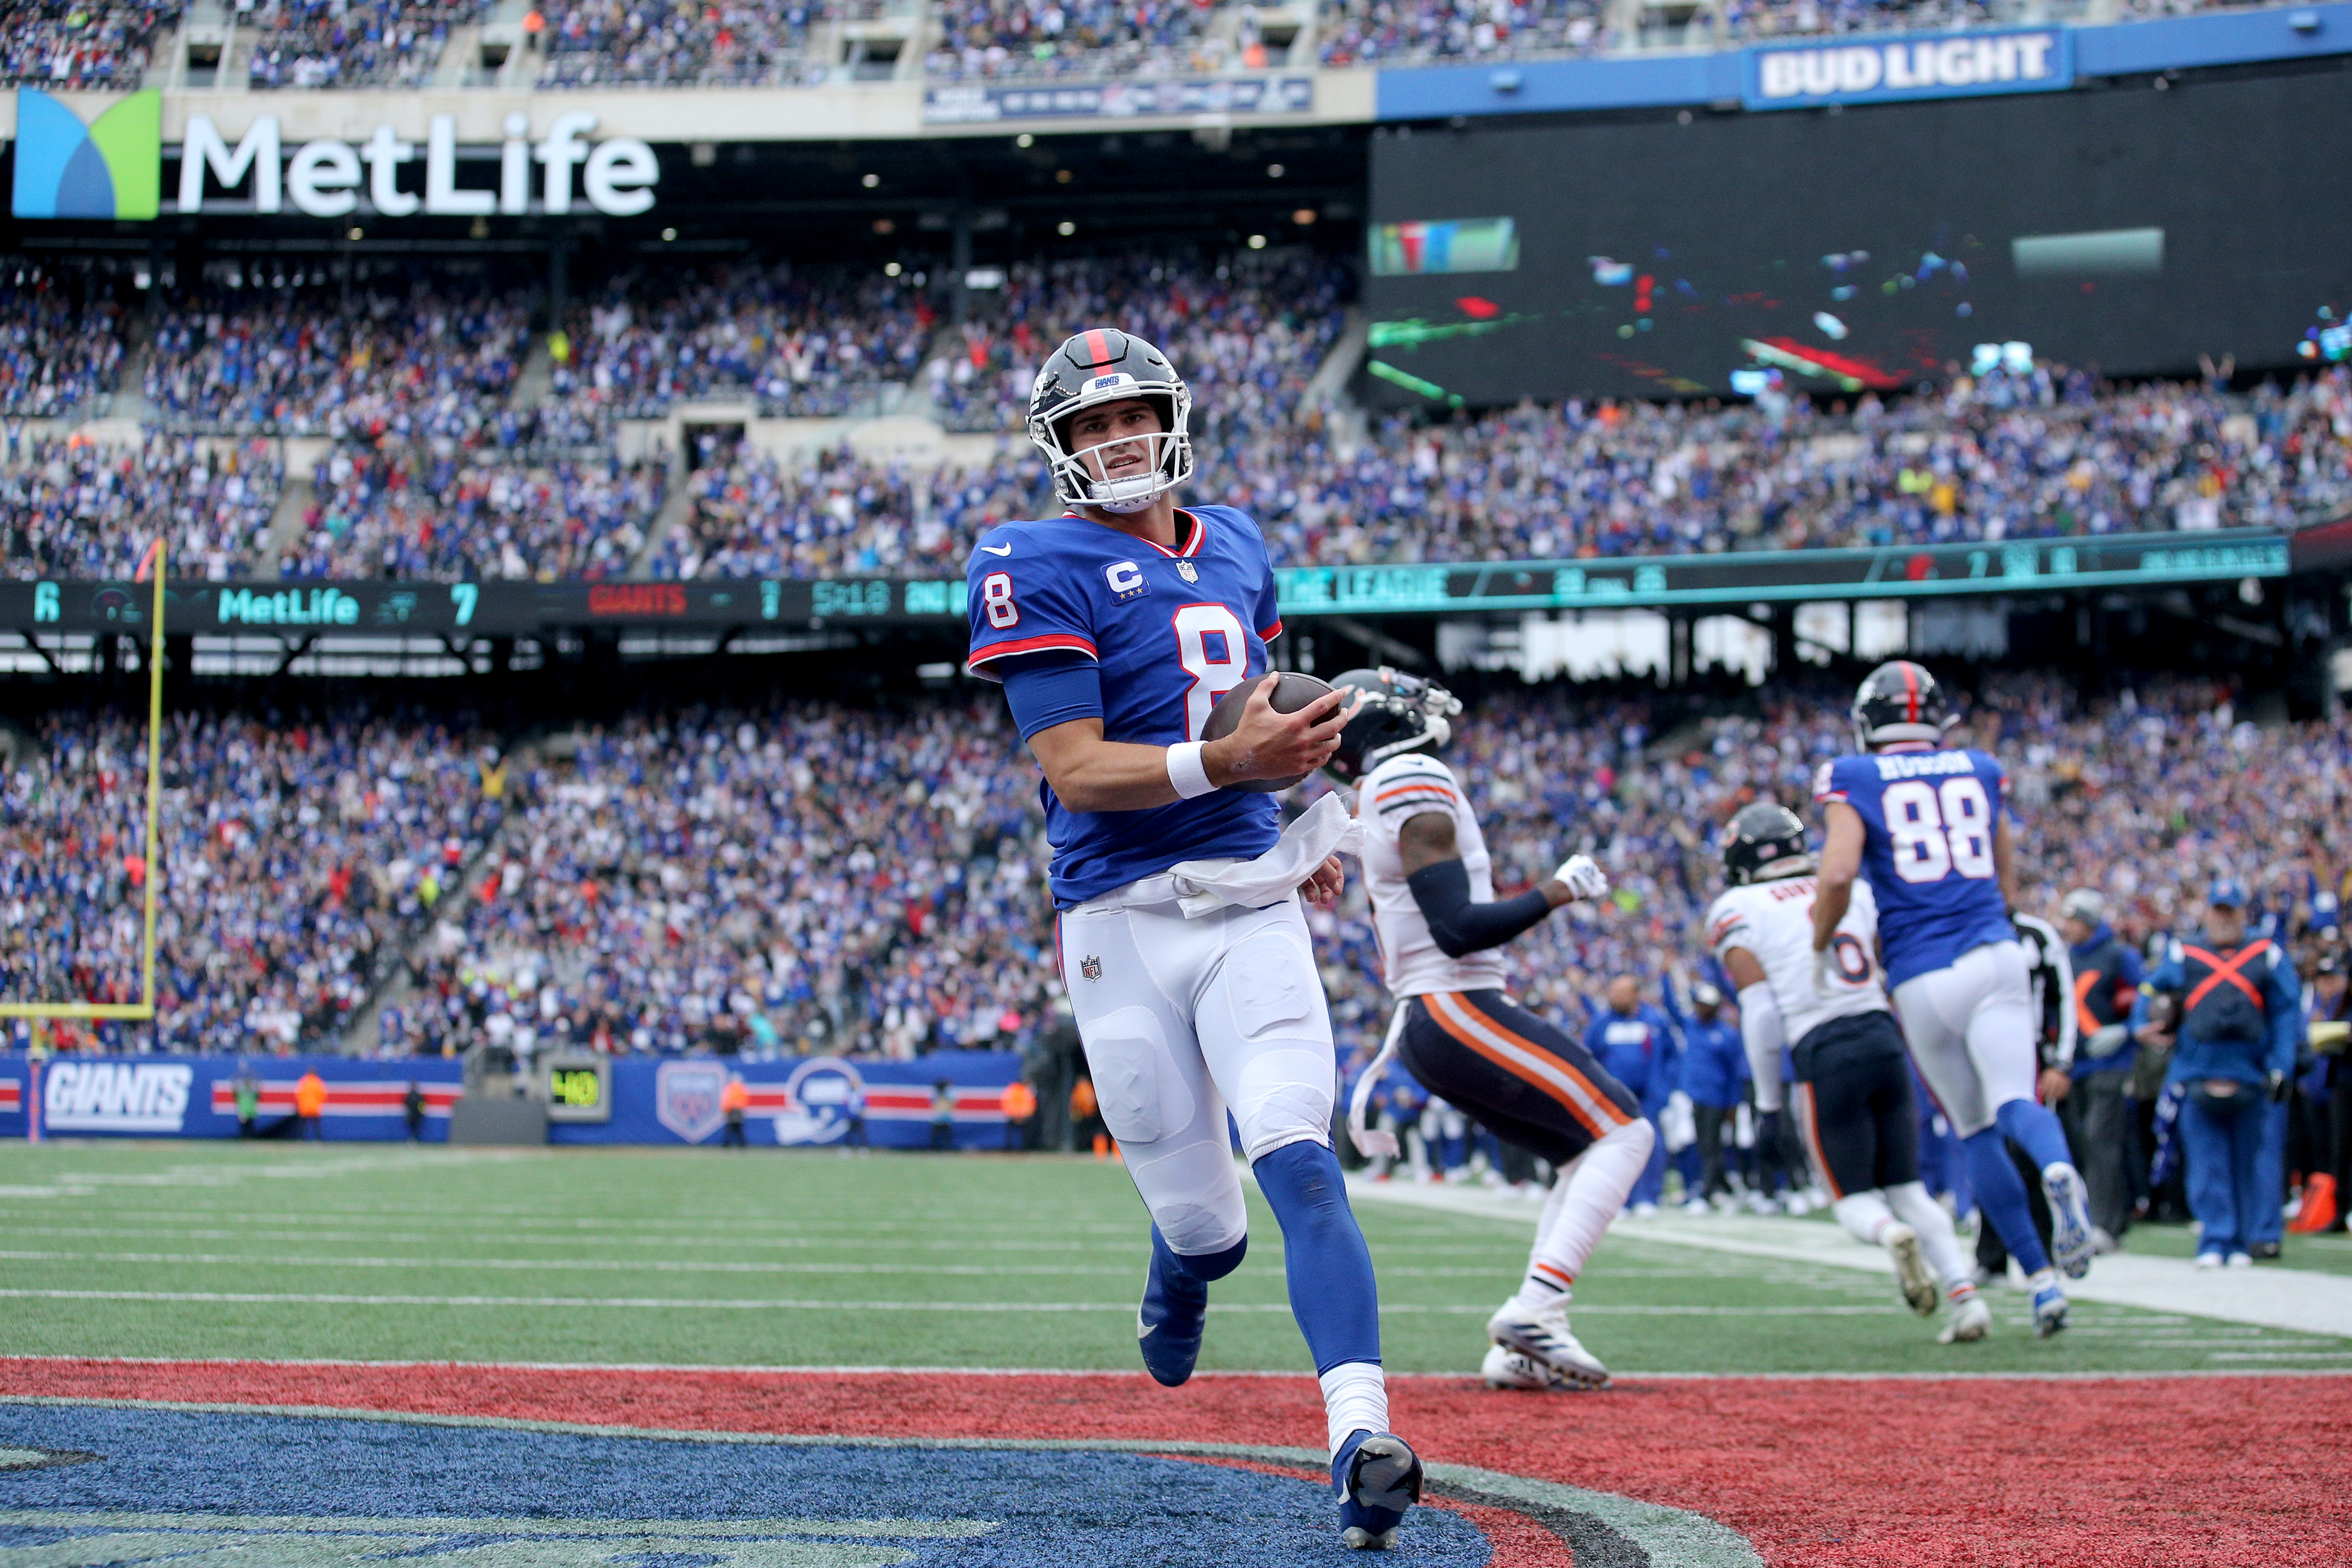 Oct 2, 2022; East Rutherford, New Jersey, USA; New York Giants quarterback Daniel Jones (8) runs for a touchdown against the Chicago Bears during the second quarter at MetLife Stadium. Mandatory Credit: Brad Penner-USA TODAY Sports